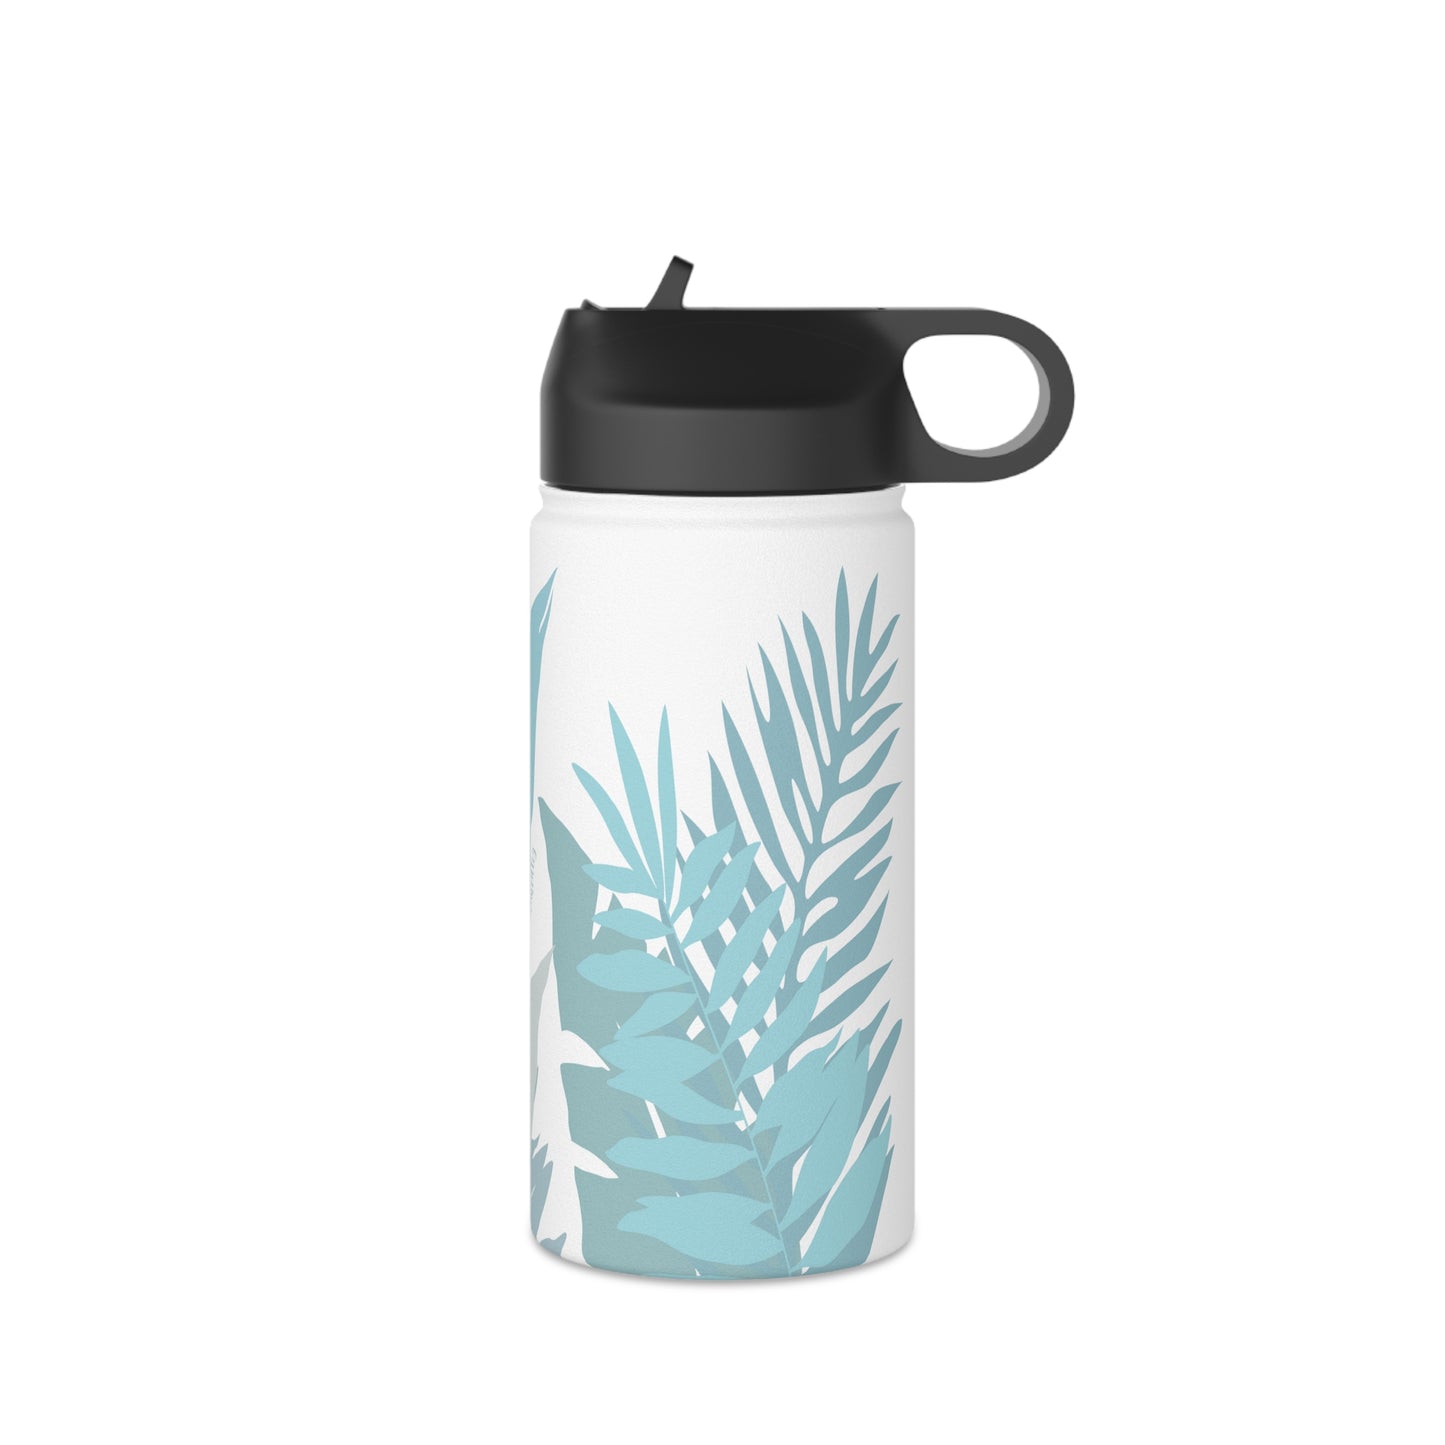 Water Bottle, 3 sizes, Stainless Steel with Sip Straw- Whispering Leaves in Blue